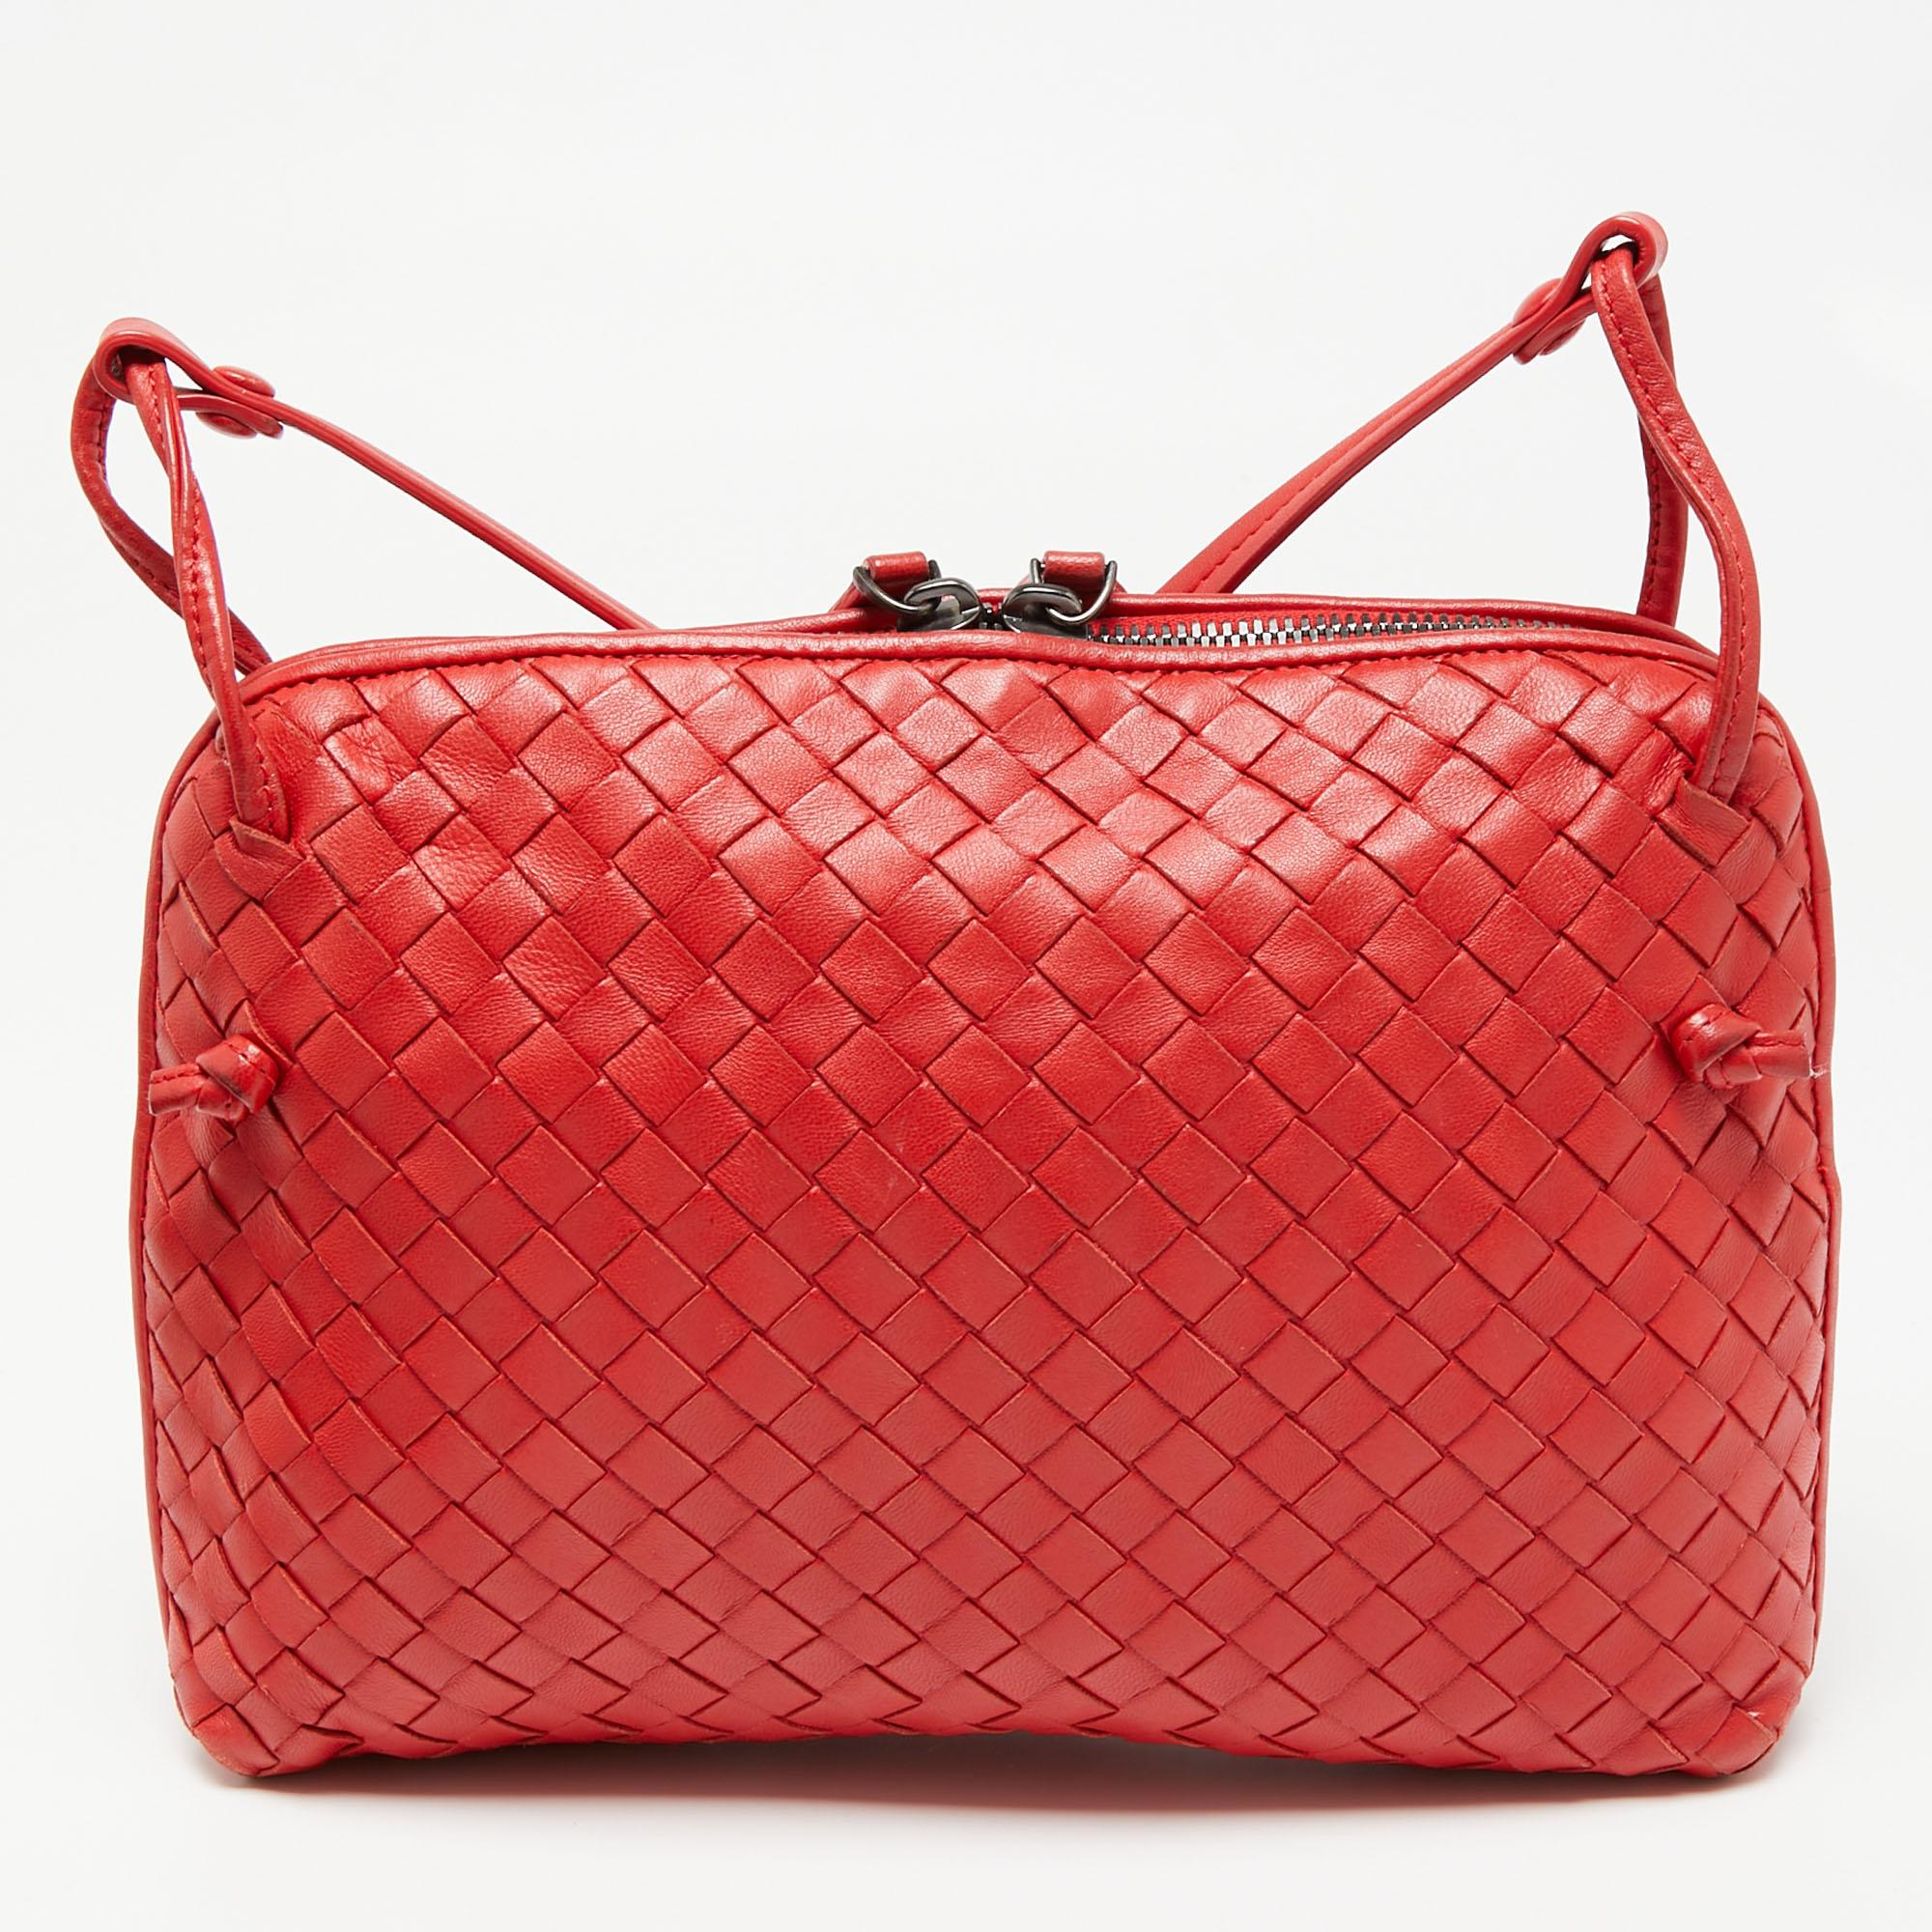 This Nodini bag from Bottega Veneta is crafted from leather using their signature Intrecciato weaving technique flaunting a seamless silhouette. This shoulder bag, personifying elegance and subtle charm, is held by a long shoulder strap. Brimming